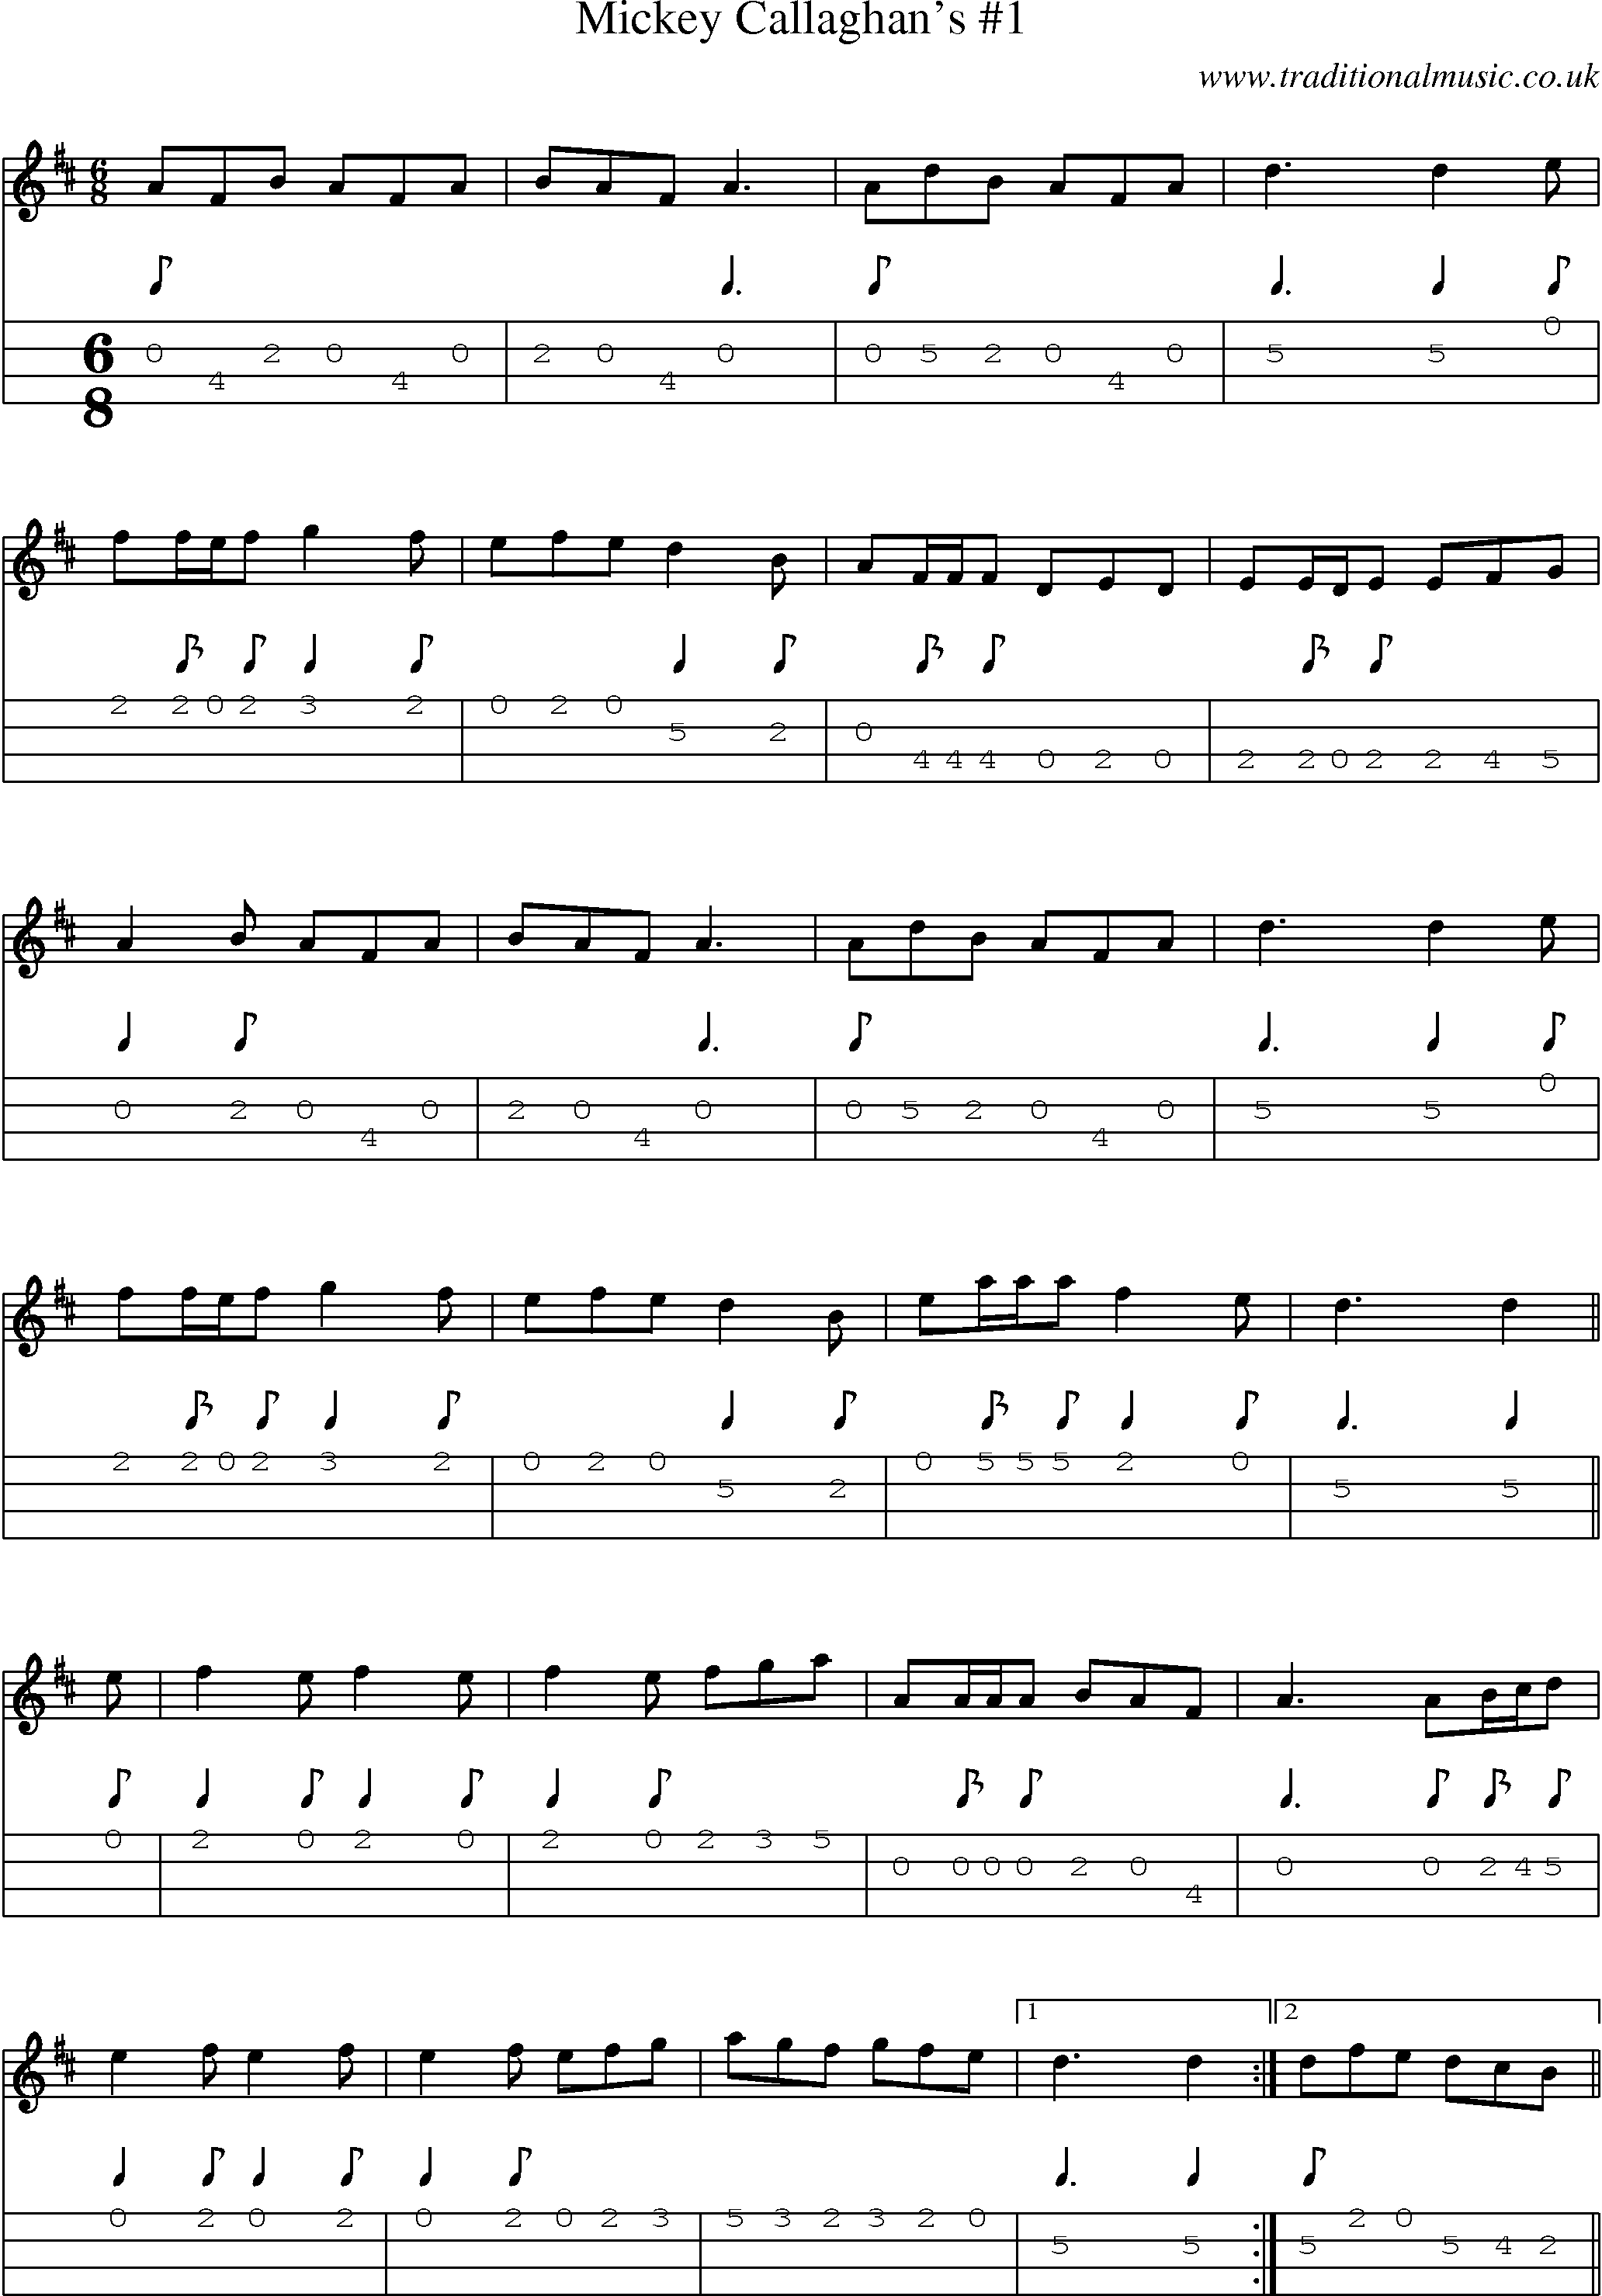 Music Score and Mandolin Tabs for Mickey Callaghans 1